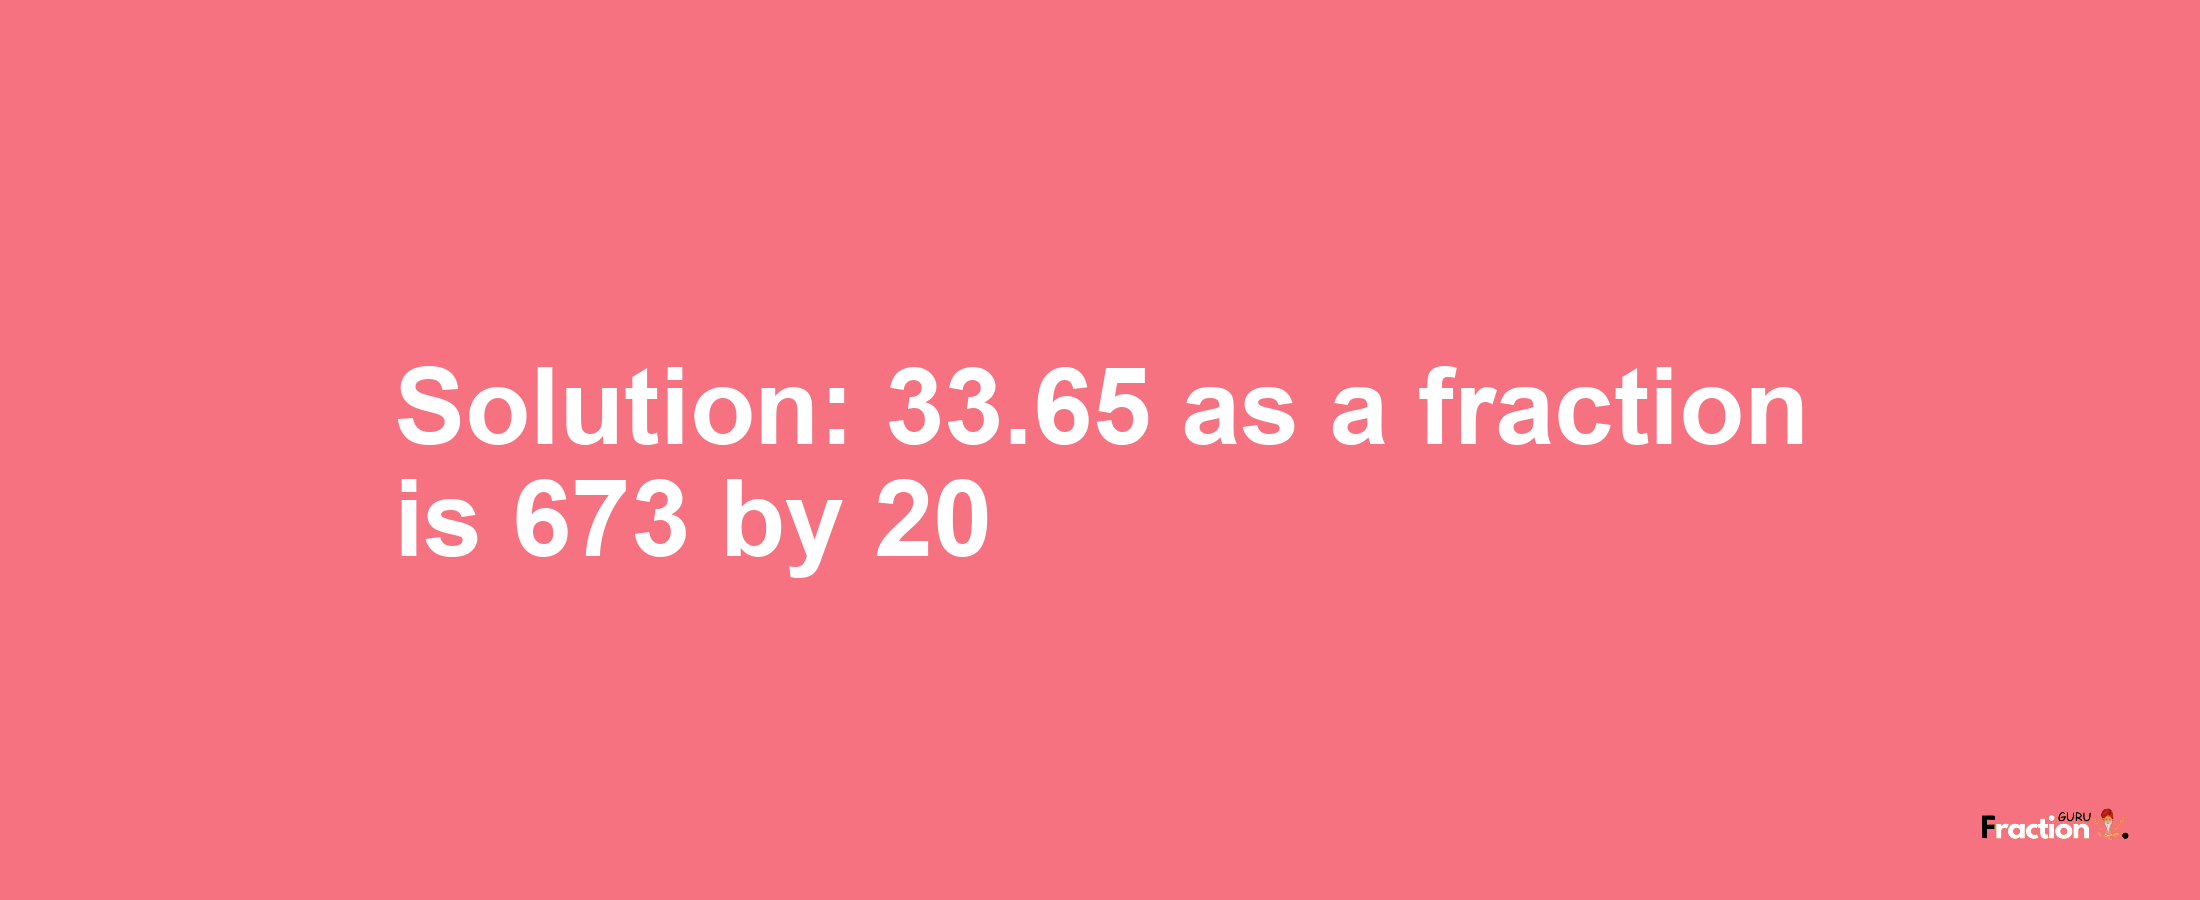 Solution:33.65 as a fraction is 673/20